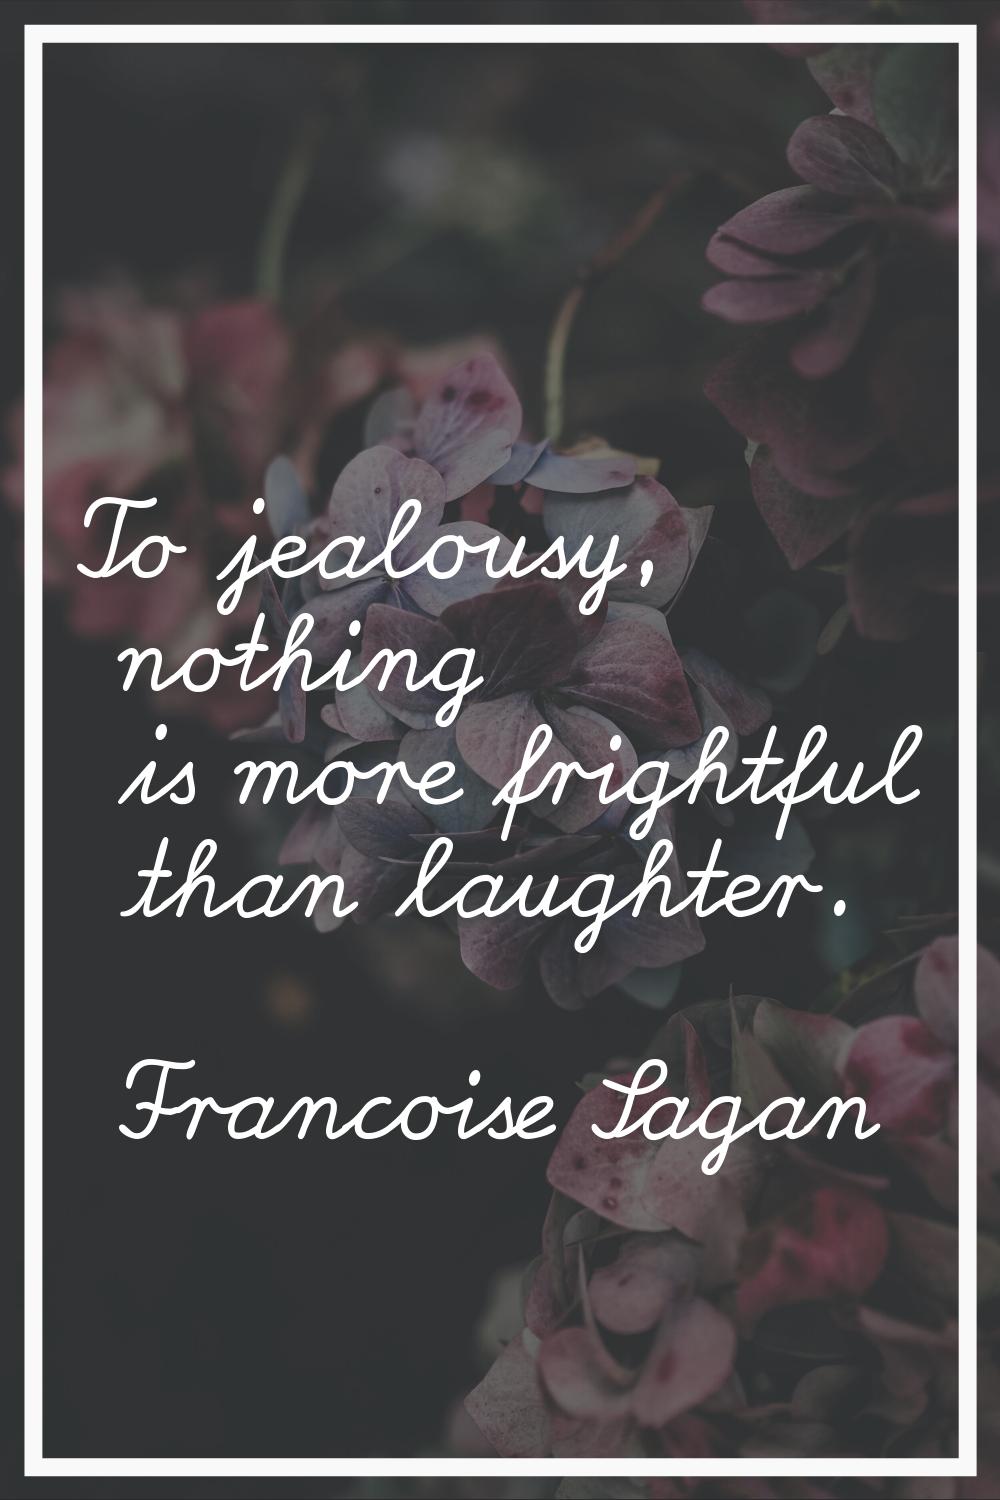 To jealousy, nothing is more frightful than laughter.